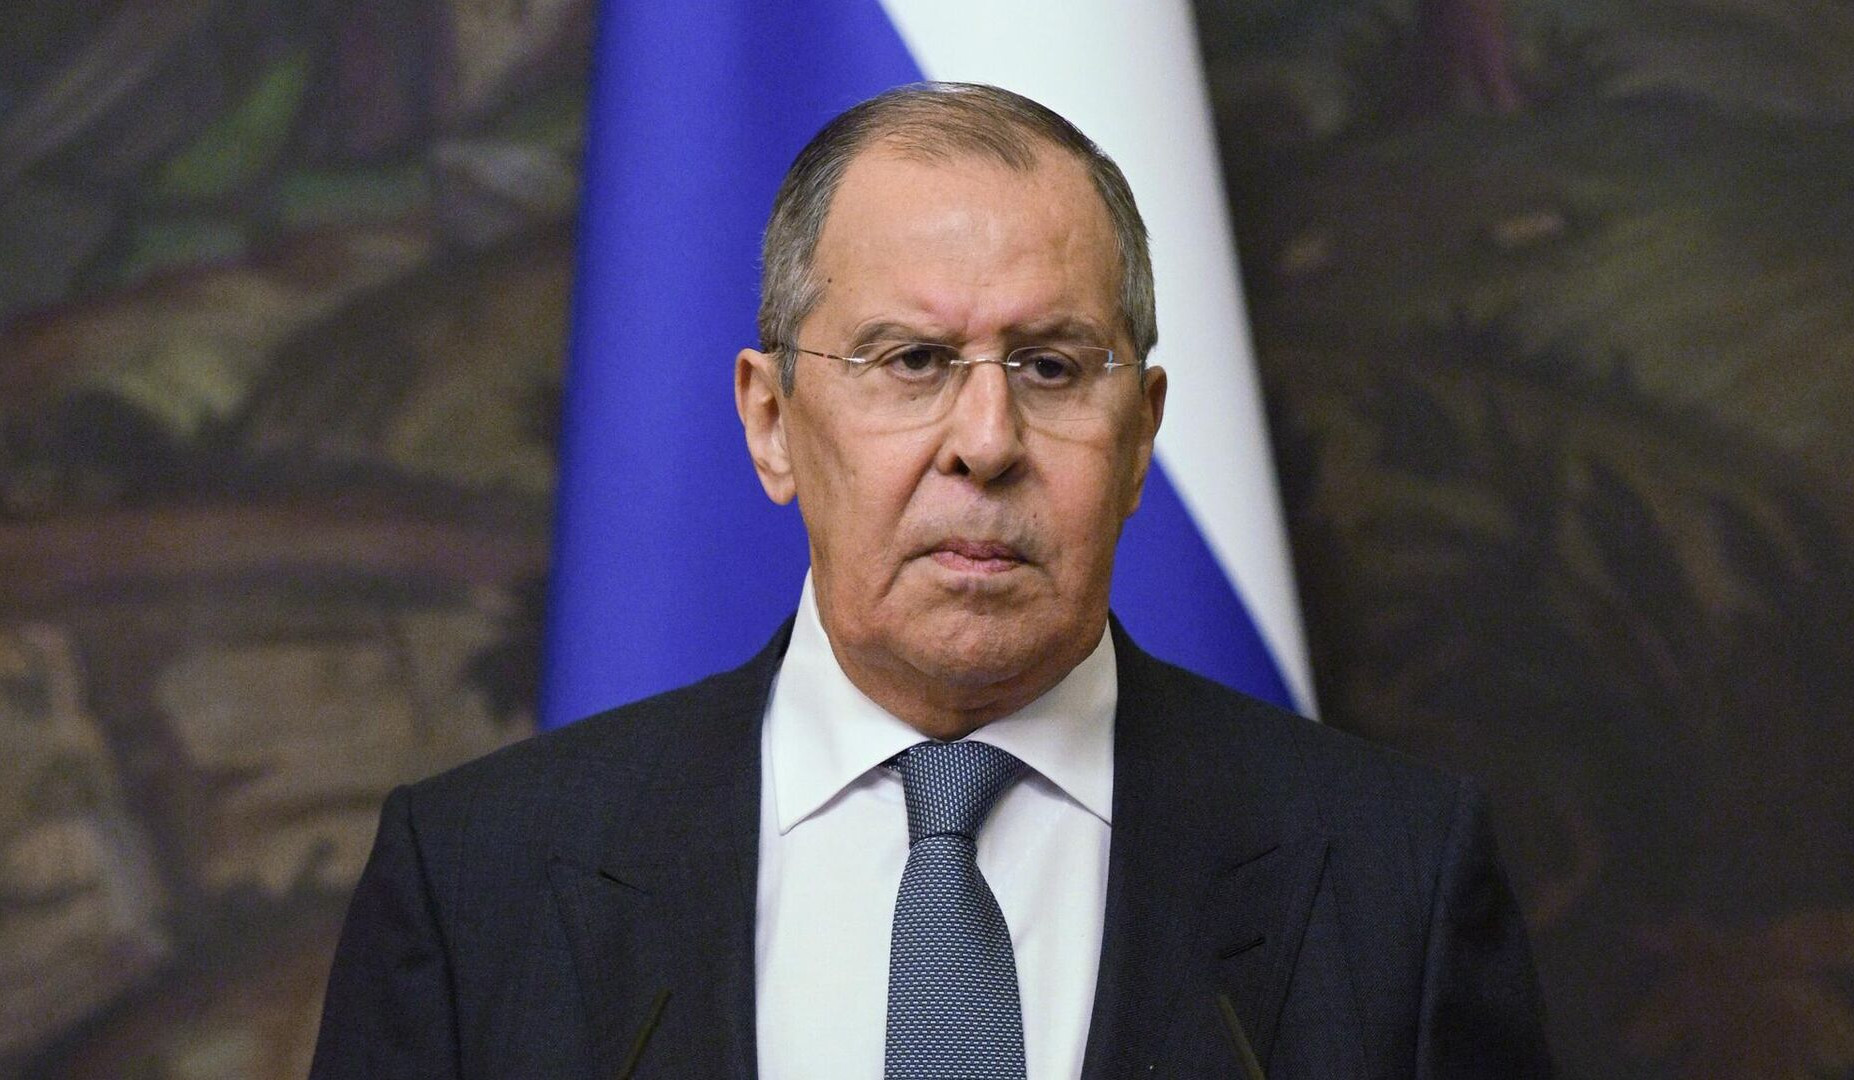 Russia made no request for CSTO assistance in special military operation, Lavrov